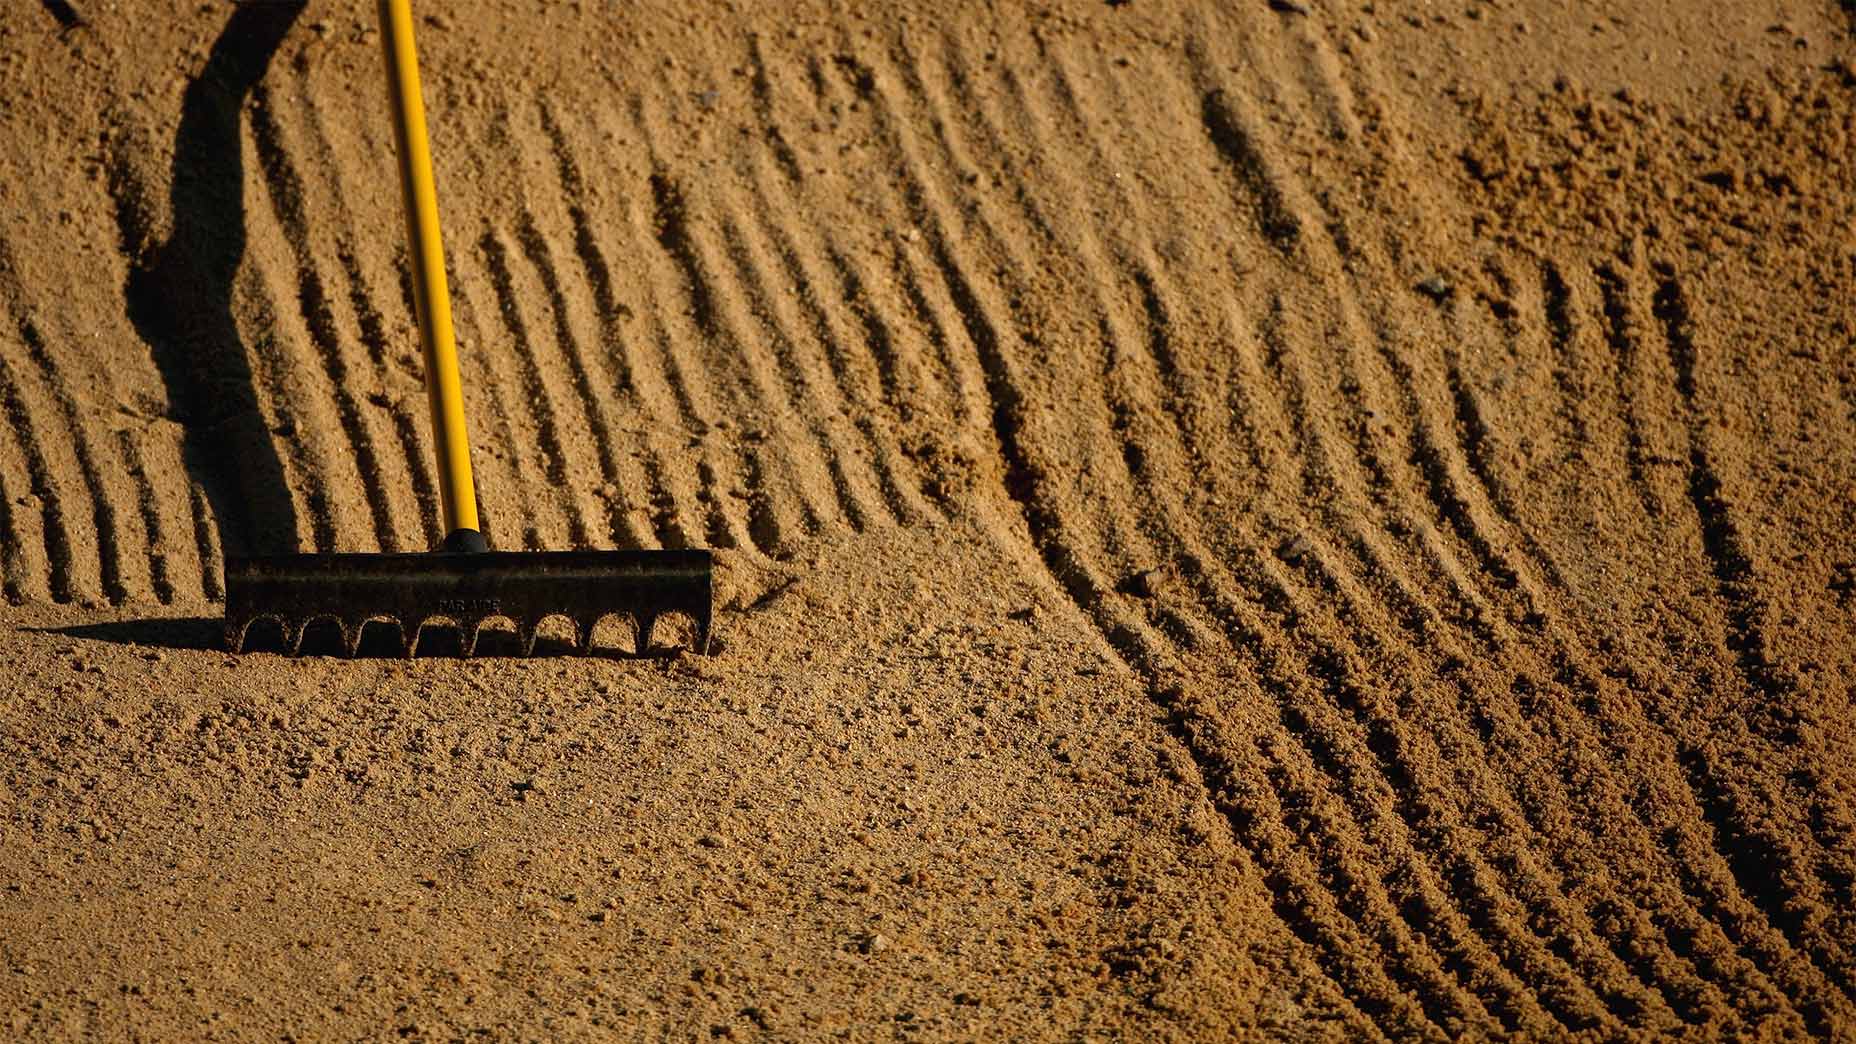 Is it time to officially get rid of bunker rakes? The answer is complicated